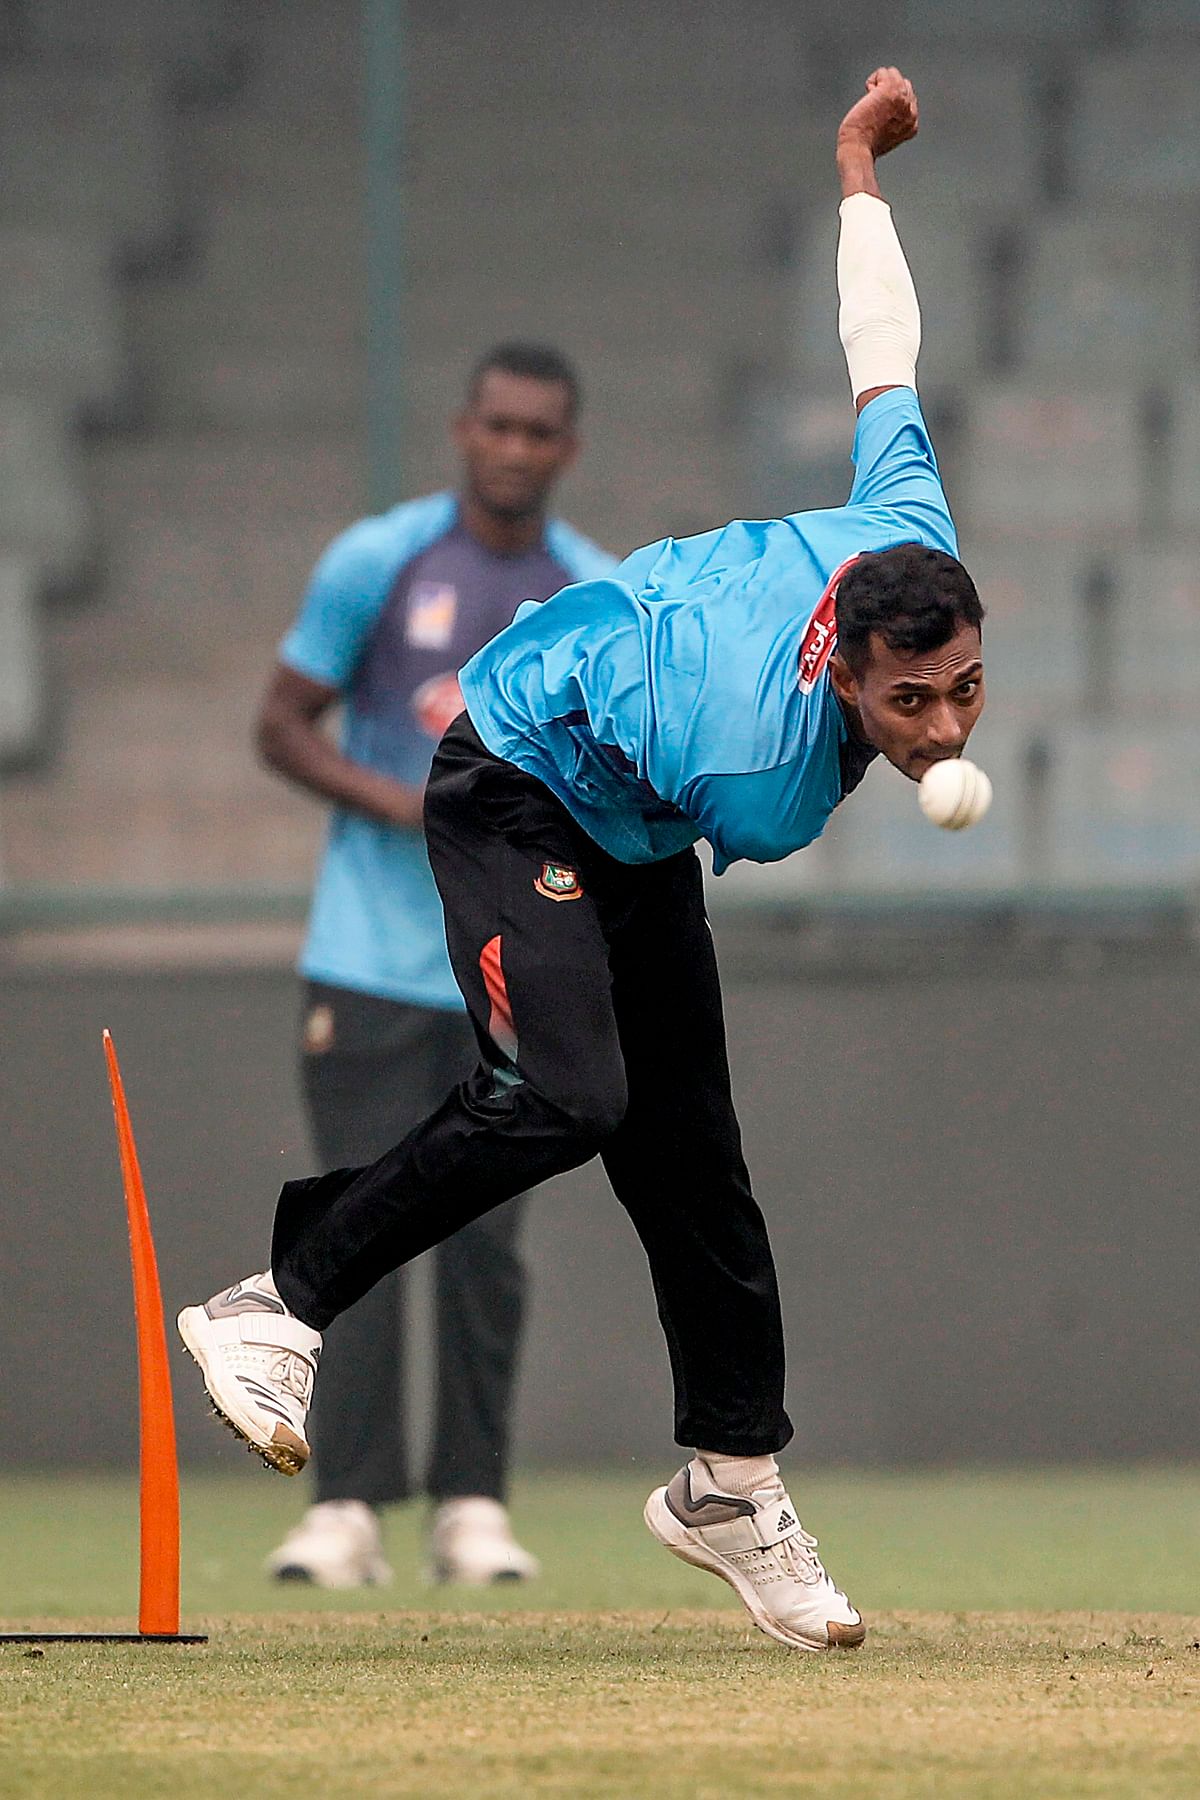 Bangladesh`s Shafiul Islam bowls during a practice session under heavy smog conditions at Arun Jaitley Cricket Stadium in New Delhi on 2 November 2019, ahead of the first T20 international cricket match of a three-match series between Bangladesh and India. Photo: AFP